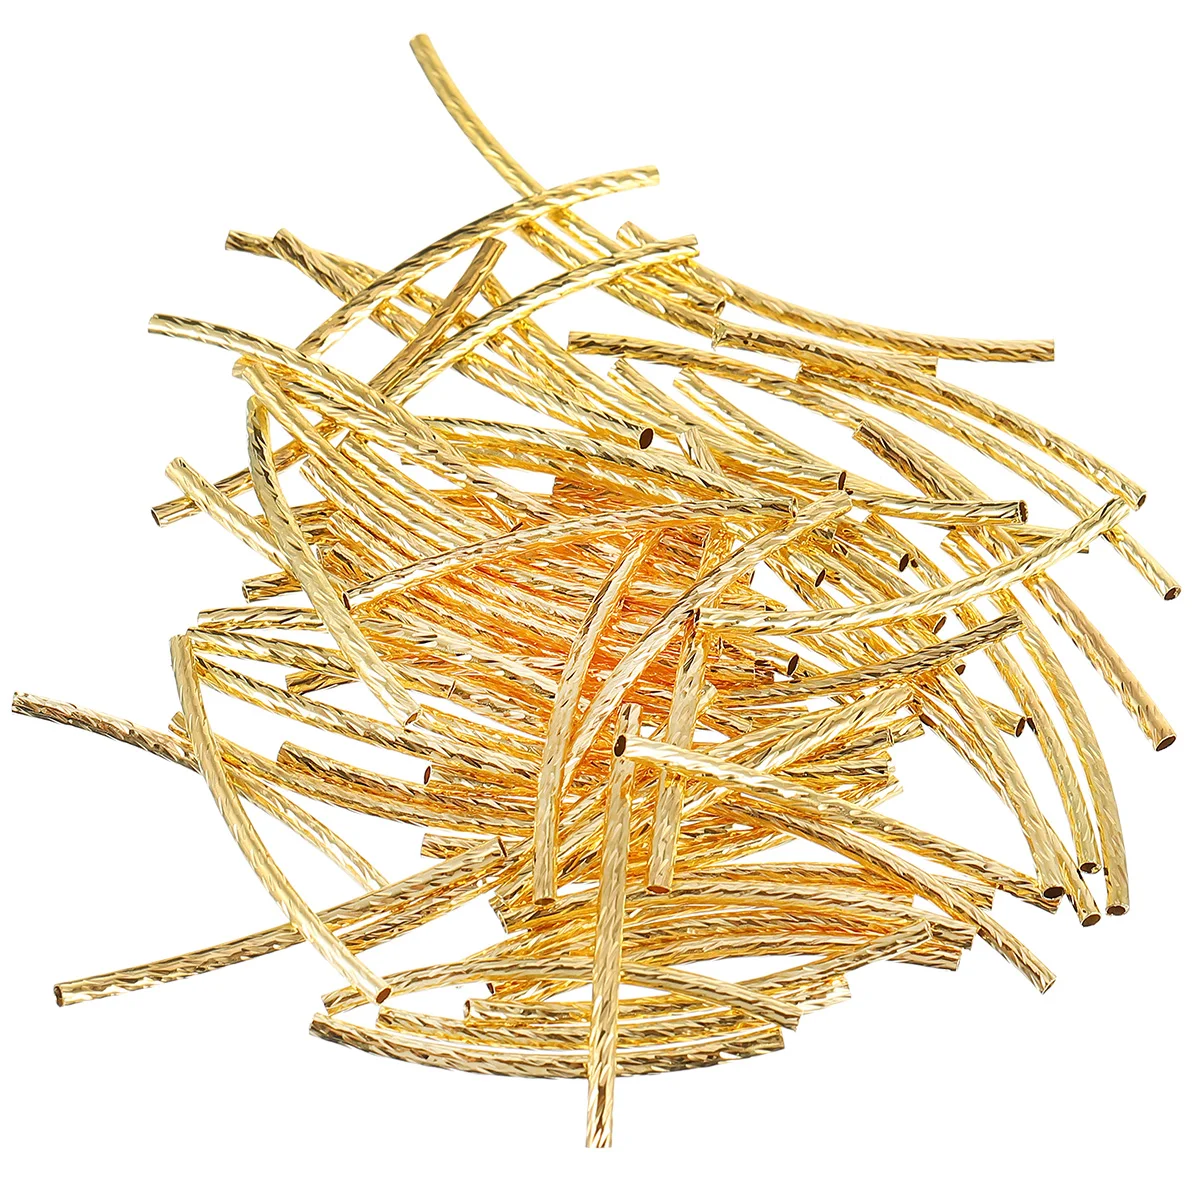 

200 Pcs Spacer Noodle Beads Jewelry Jewelry Making Tube Beads Charm Necklace Car Flower Bend Gild Golden Noodle Beads